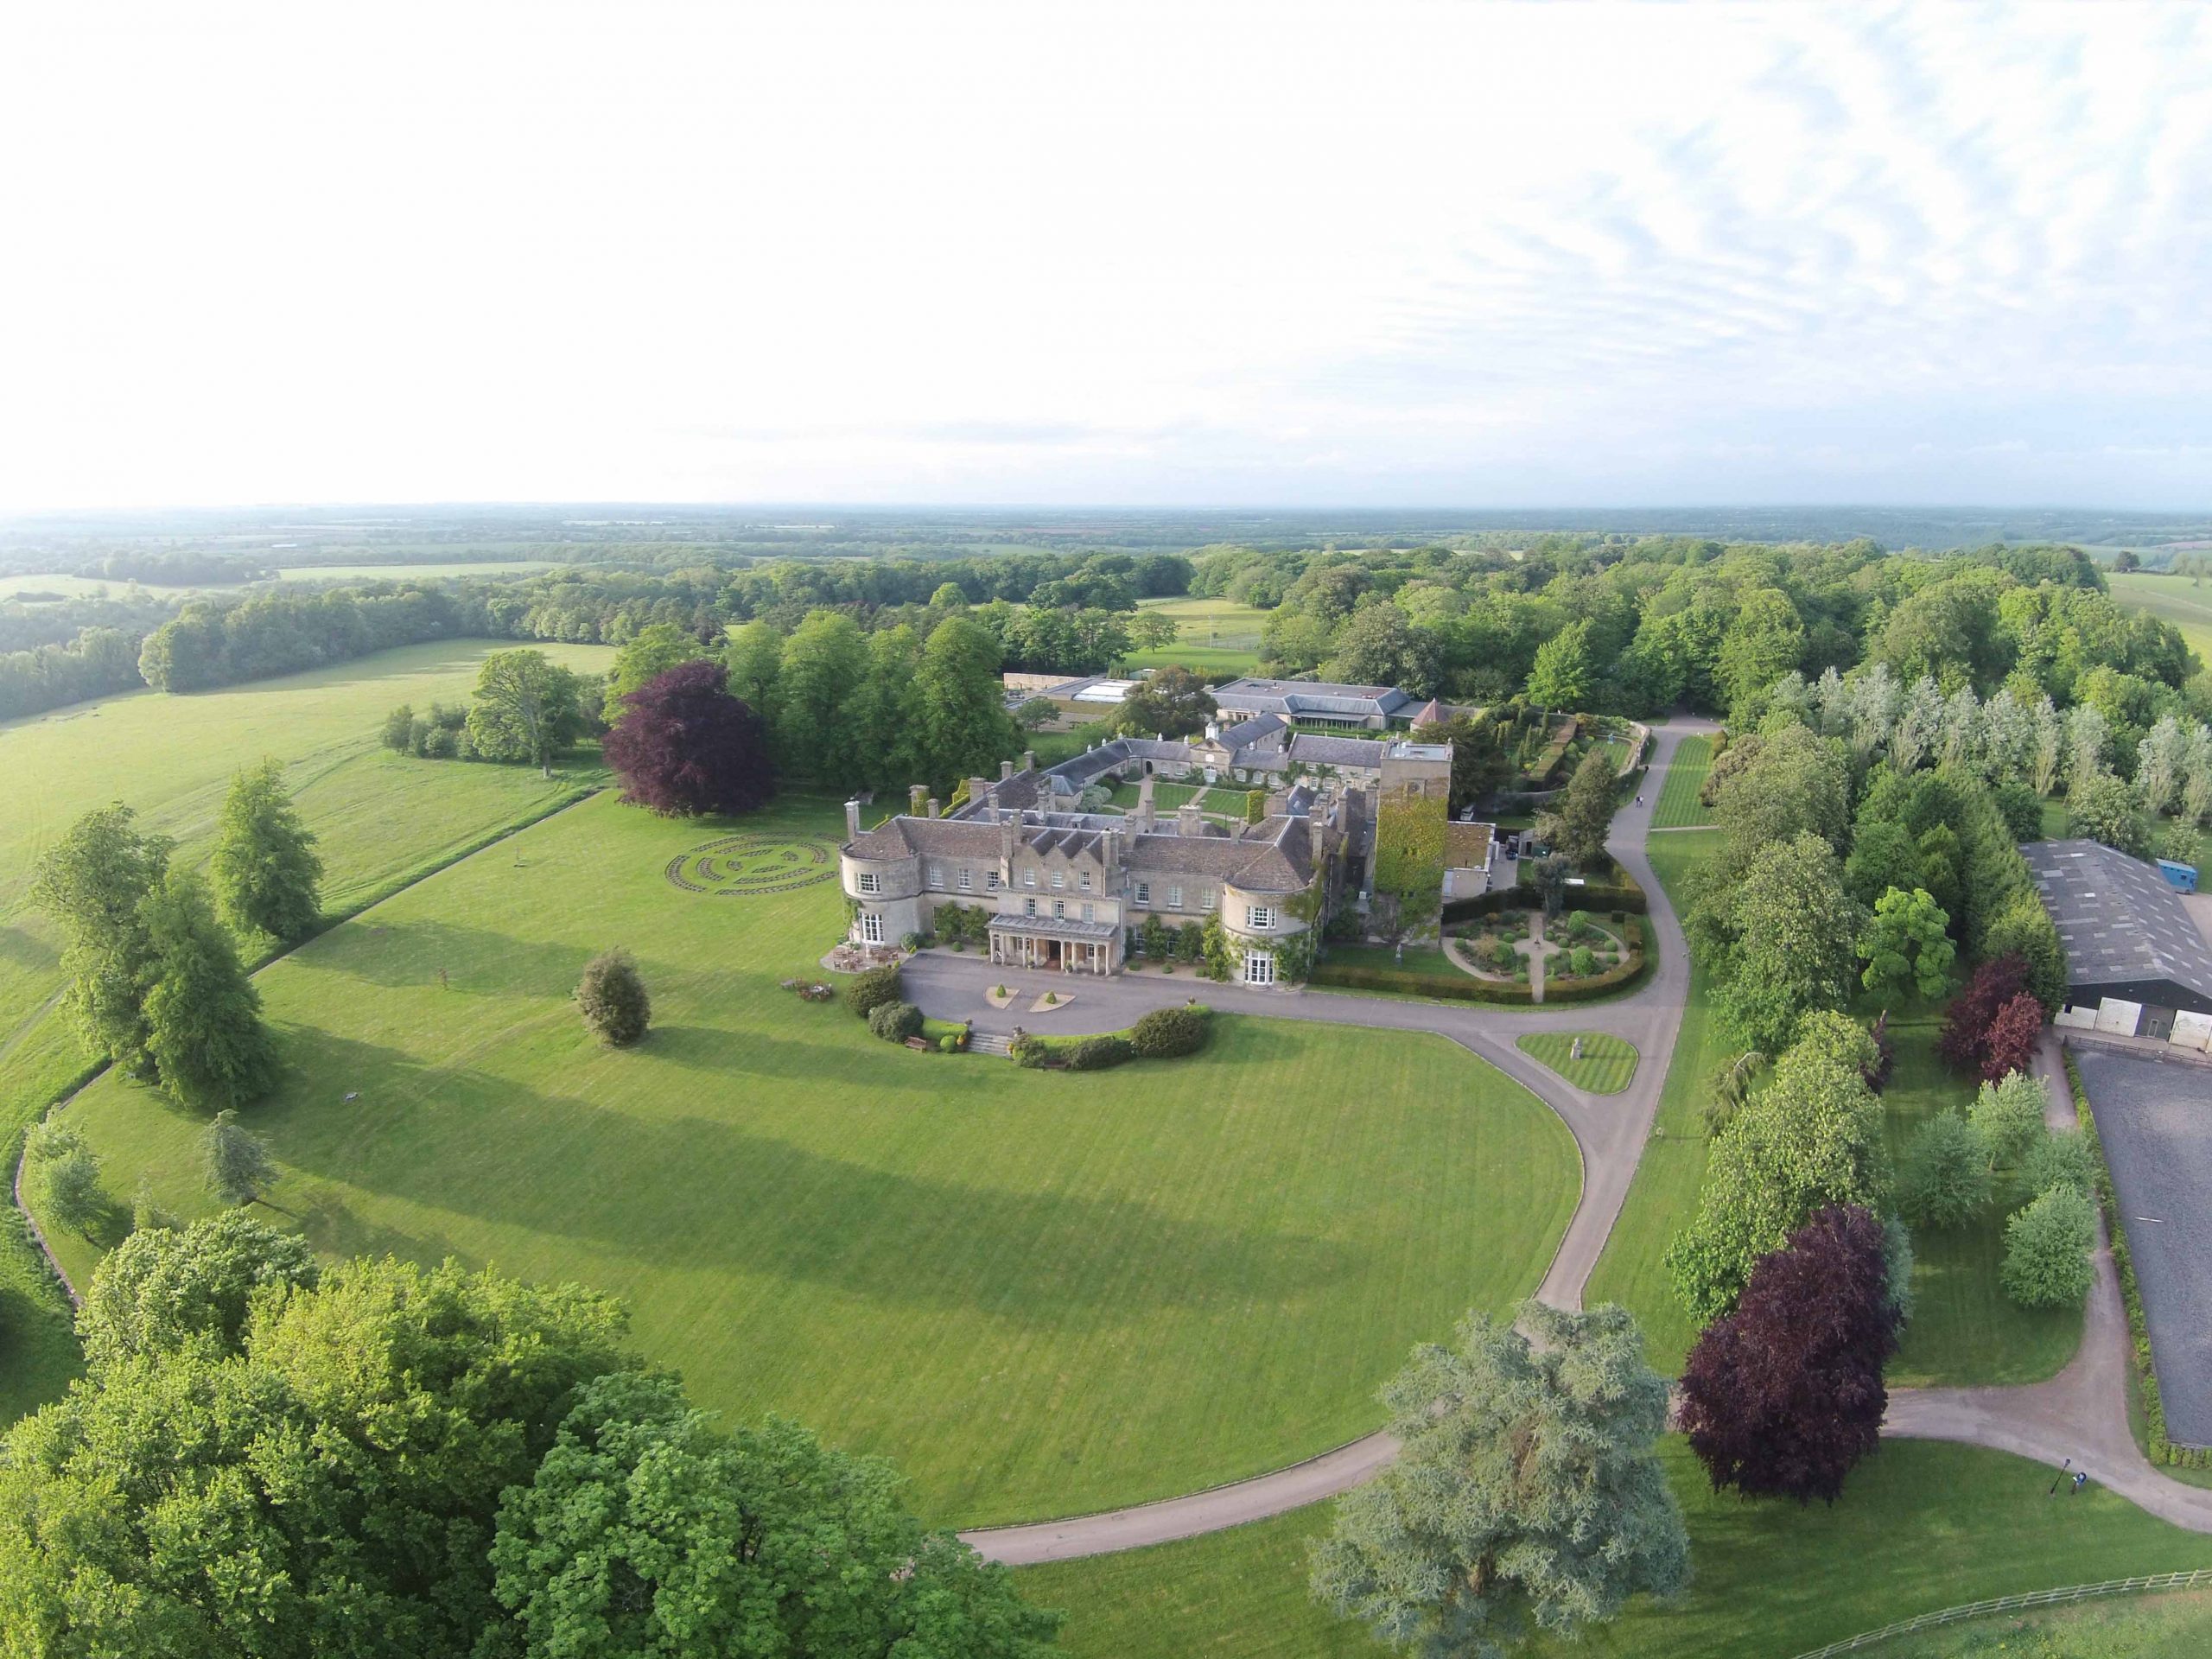 Spa Of The Month: 111Skin at Lucknam Park, Wiltshire